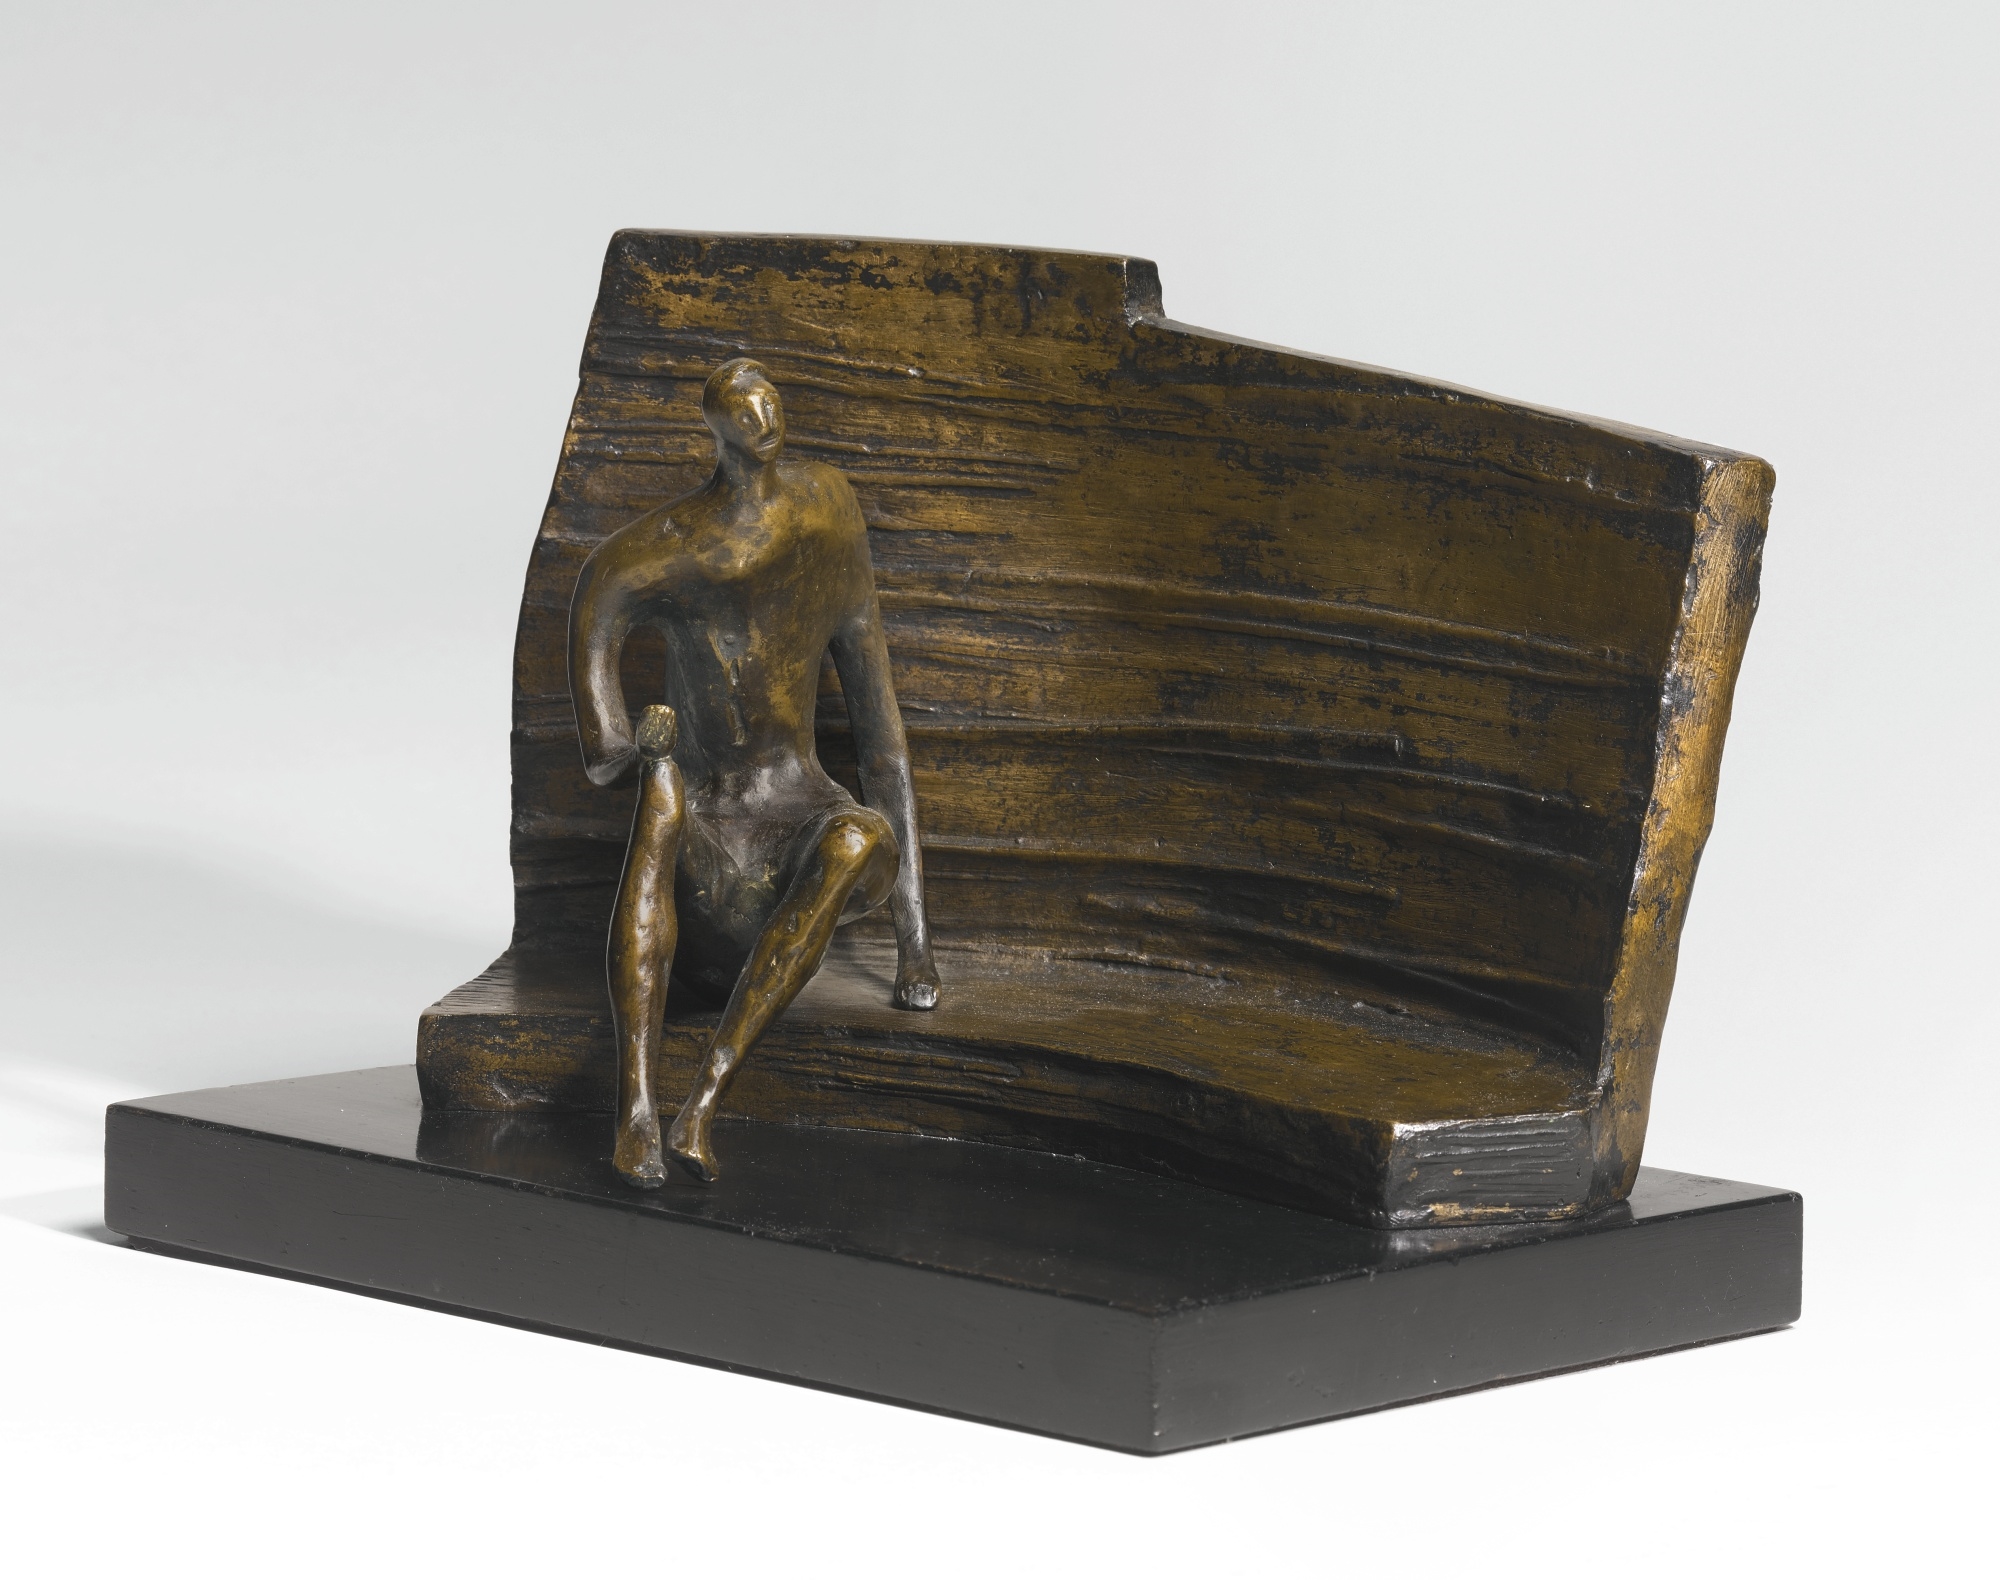 MAQUETTE FOR SEATED FIGURE AGAINST CURVED WALL by Henry Moore, 1956